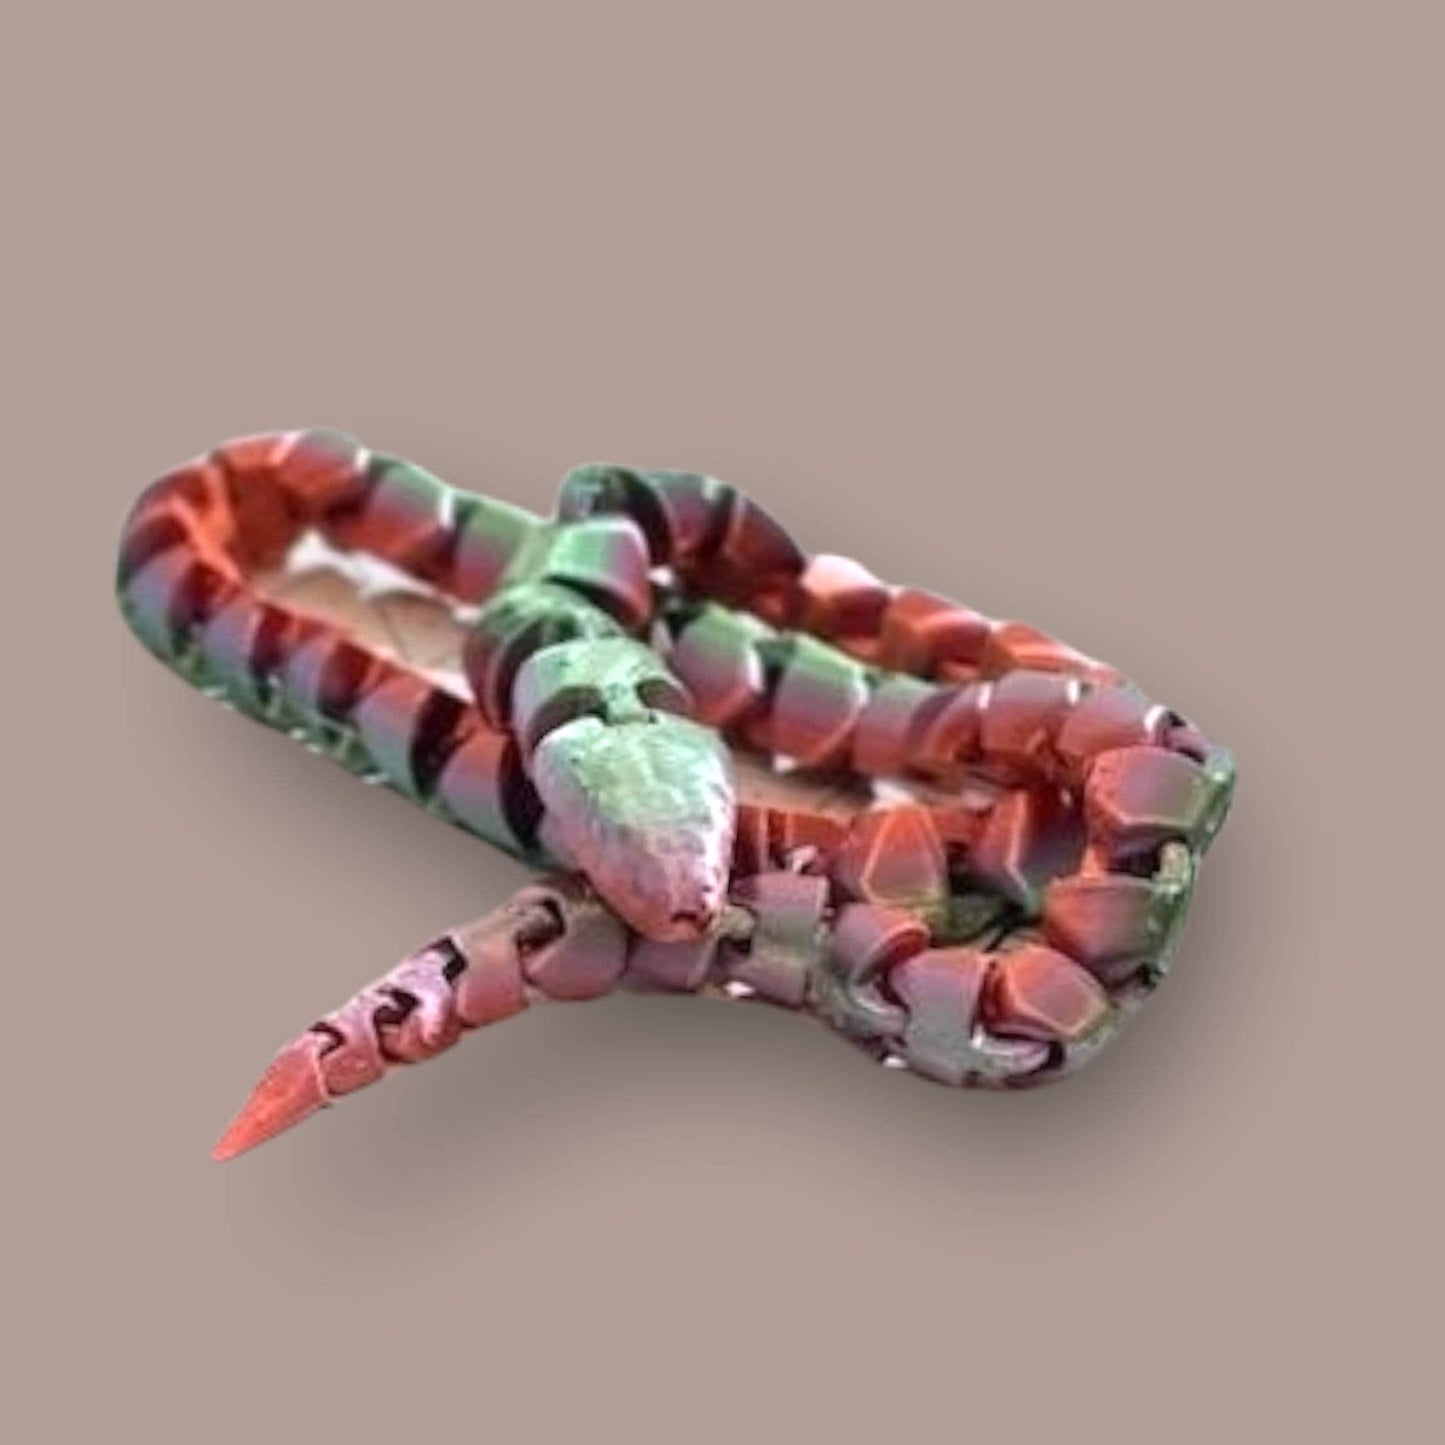 Articulated Snake Toy - 3D Printed - 2 Feet Long - Black